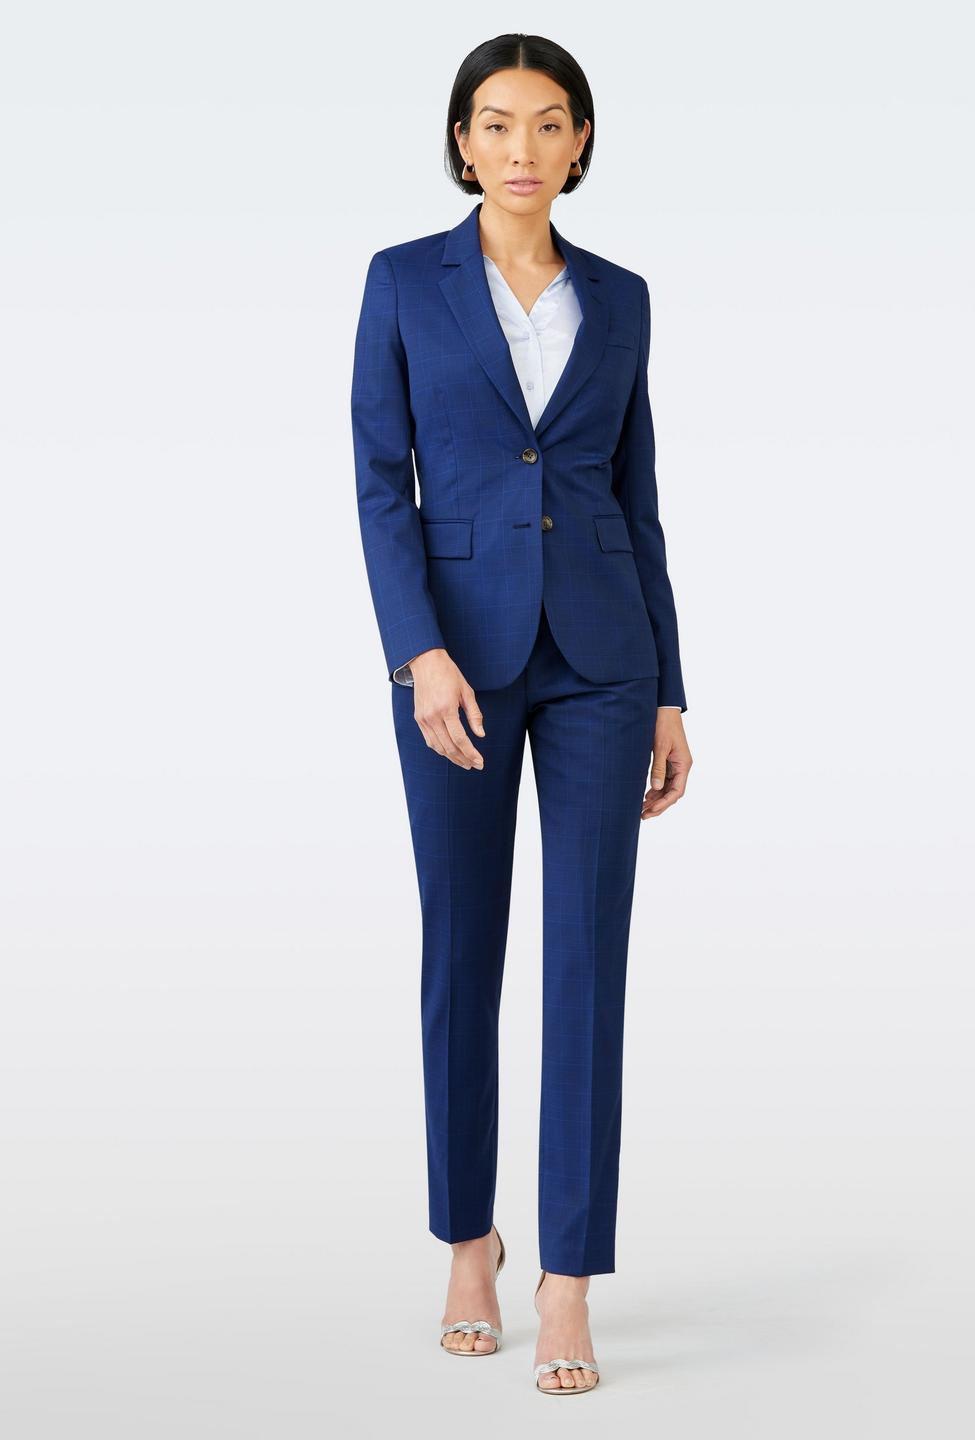 Hemsworth Prince of Wales Blue Suit